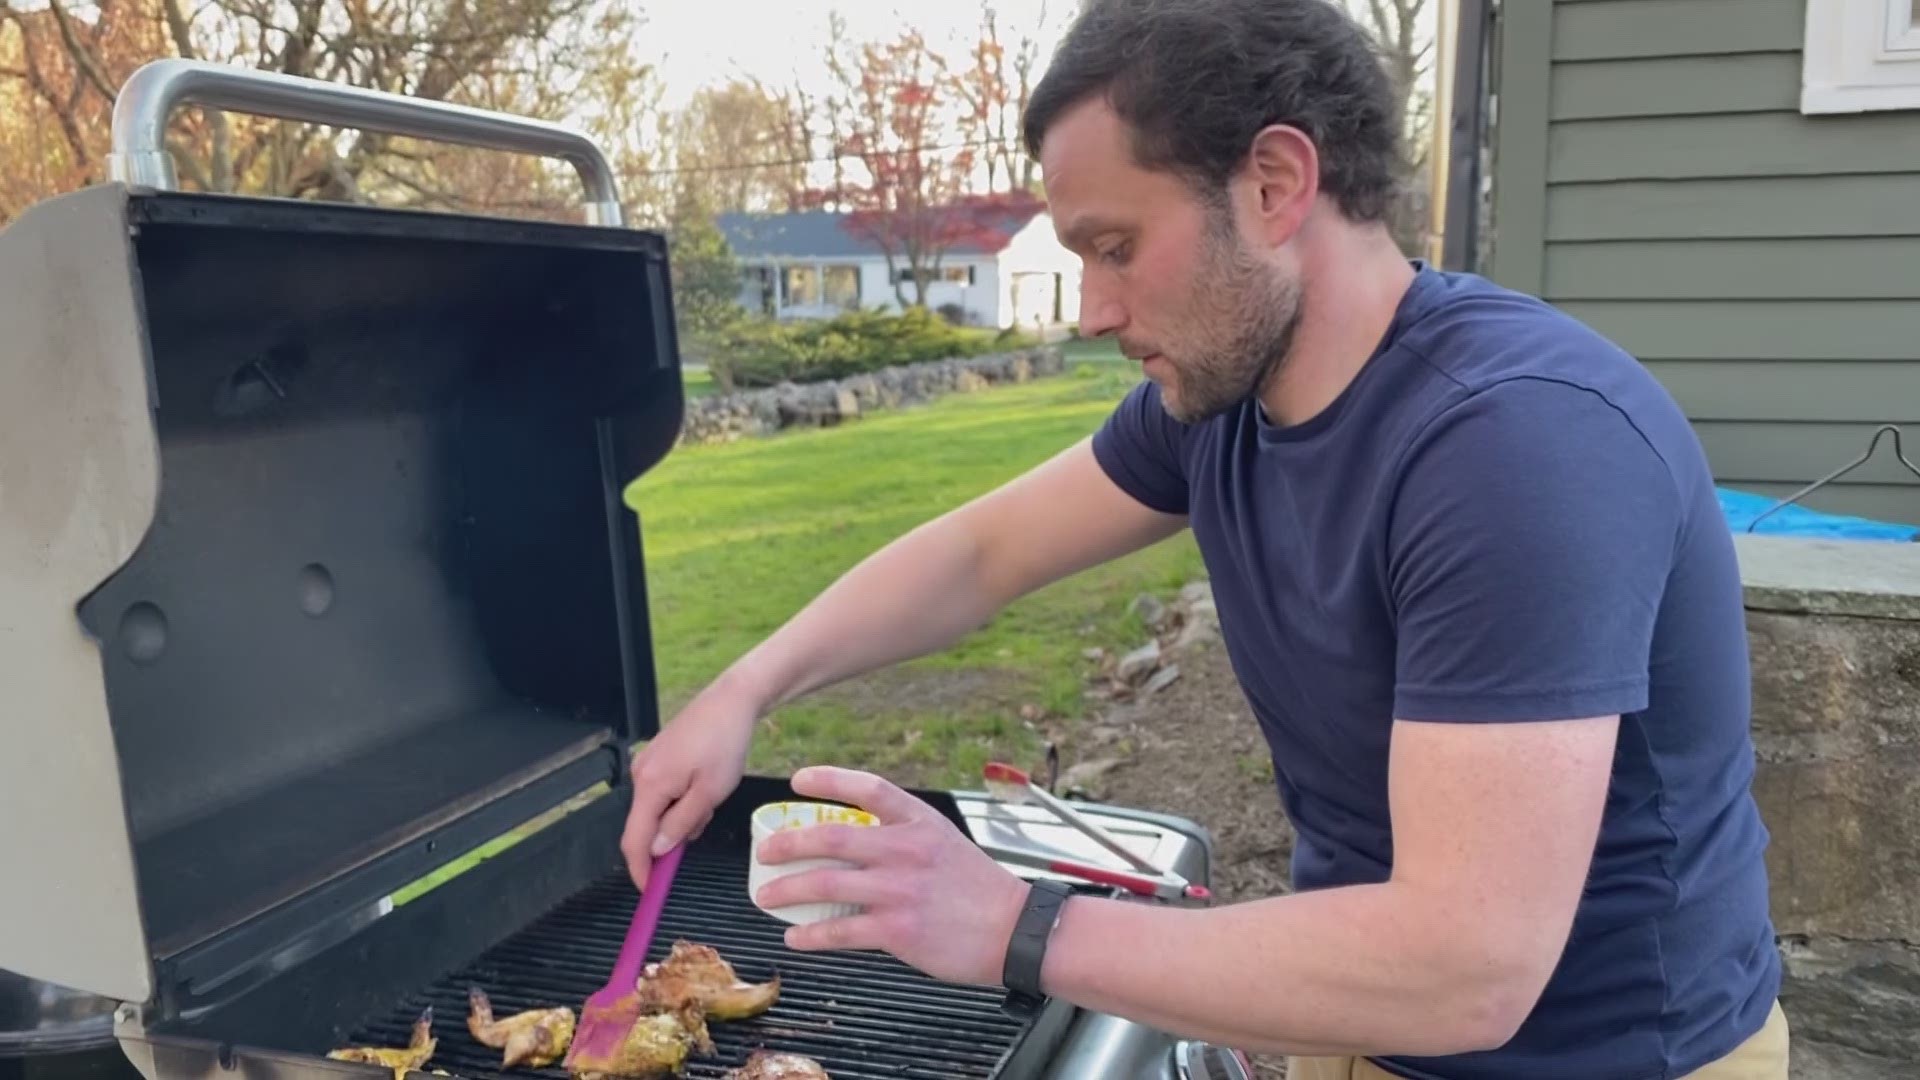 Consumer Reports shares some fresh ideas to inspire you this grilling season and some tips on buying the right grill.